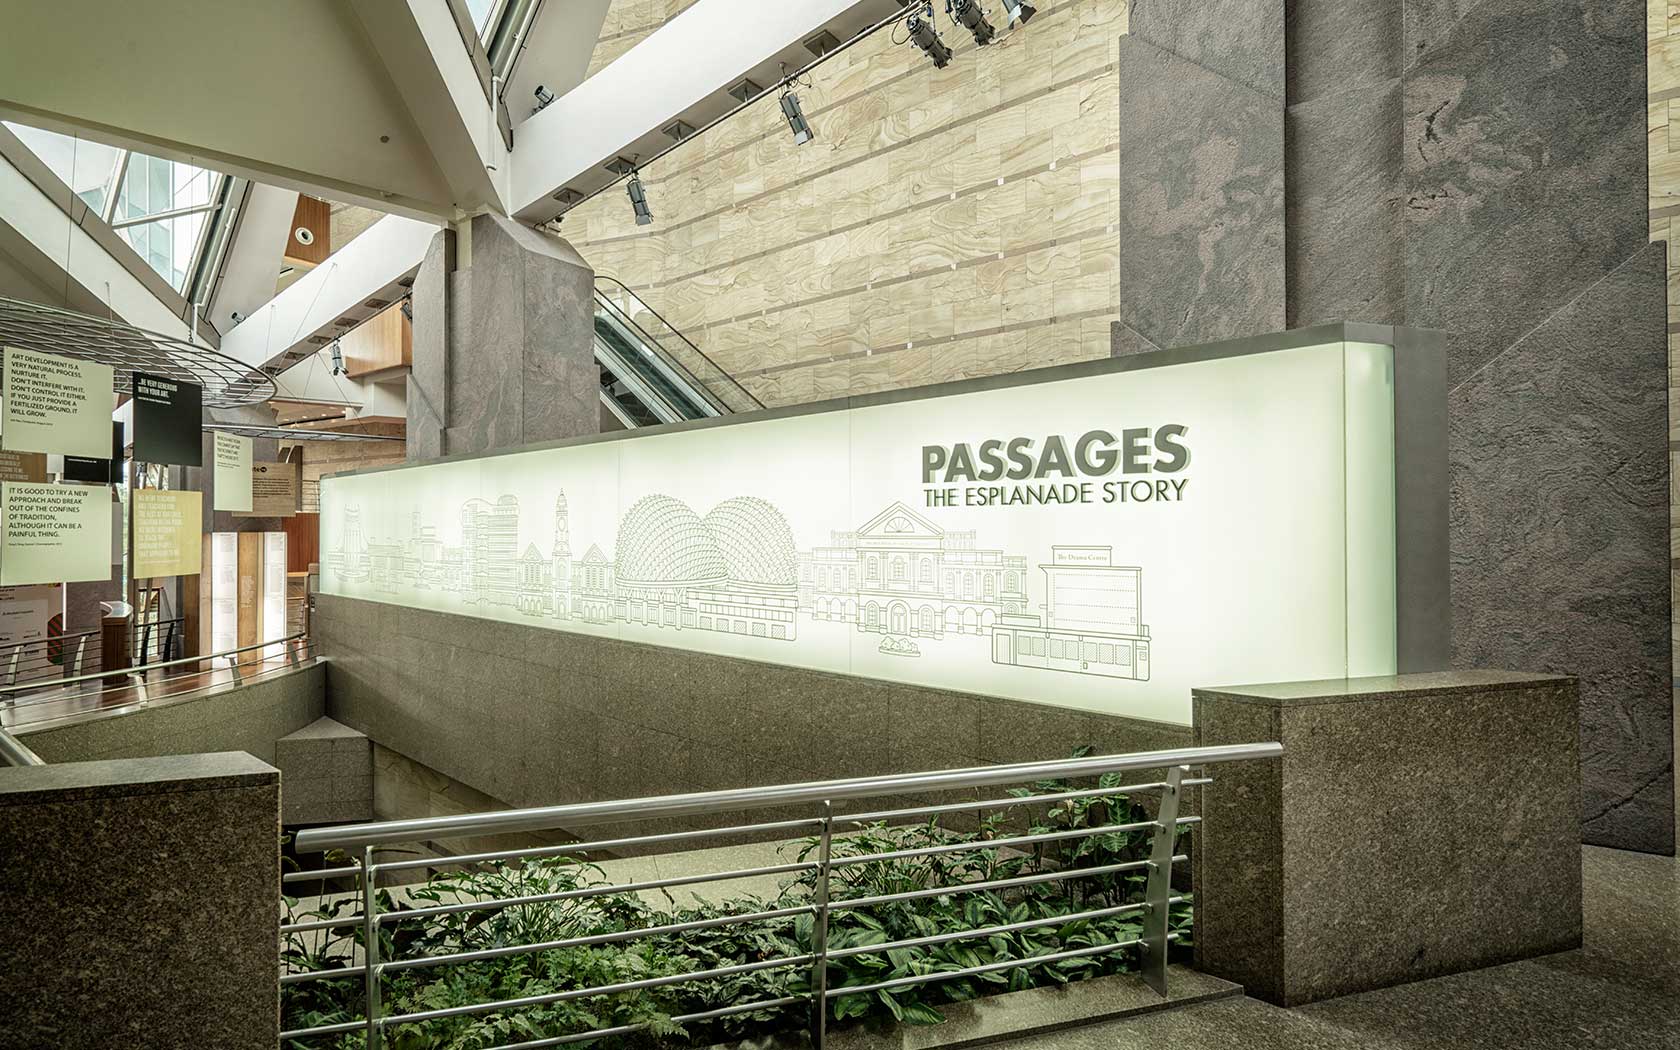 Image of Passages, an exhibition space at Esplanade Concourse